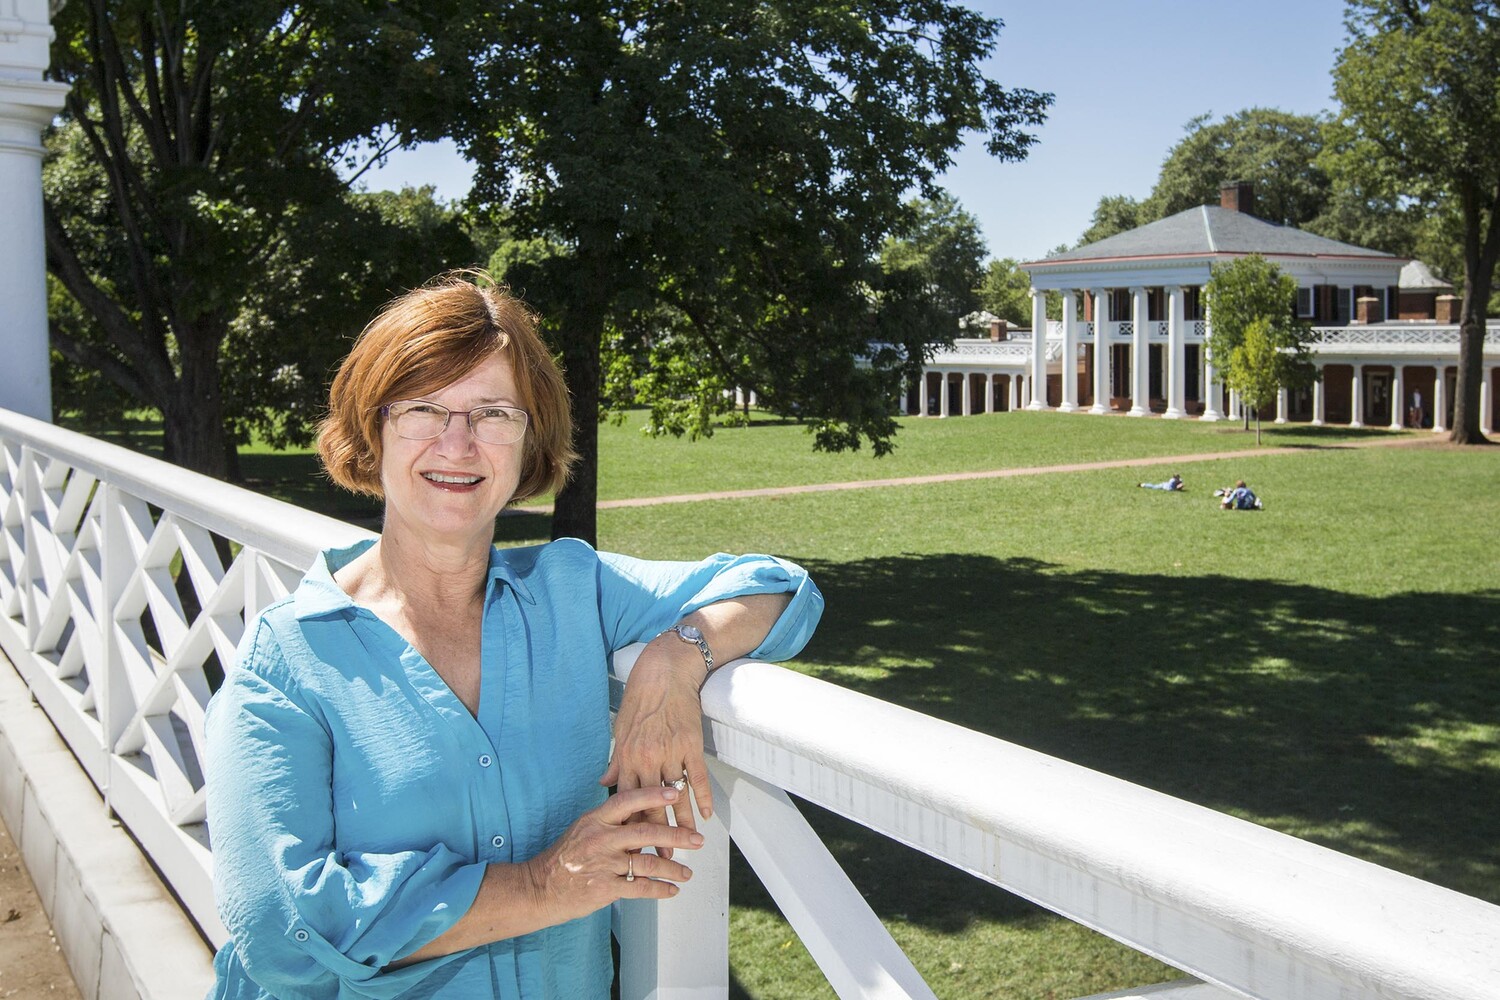 Hughes was the University of Virginia’s University Landscape Architect for 26 years until her retirement in 2022.
Credit: Dan Addison, UVA Communications